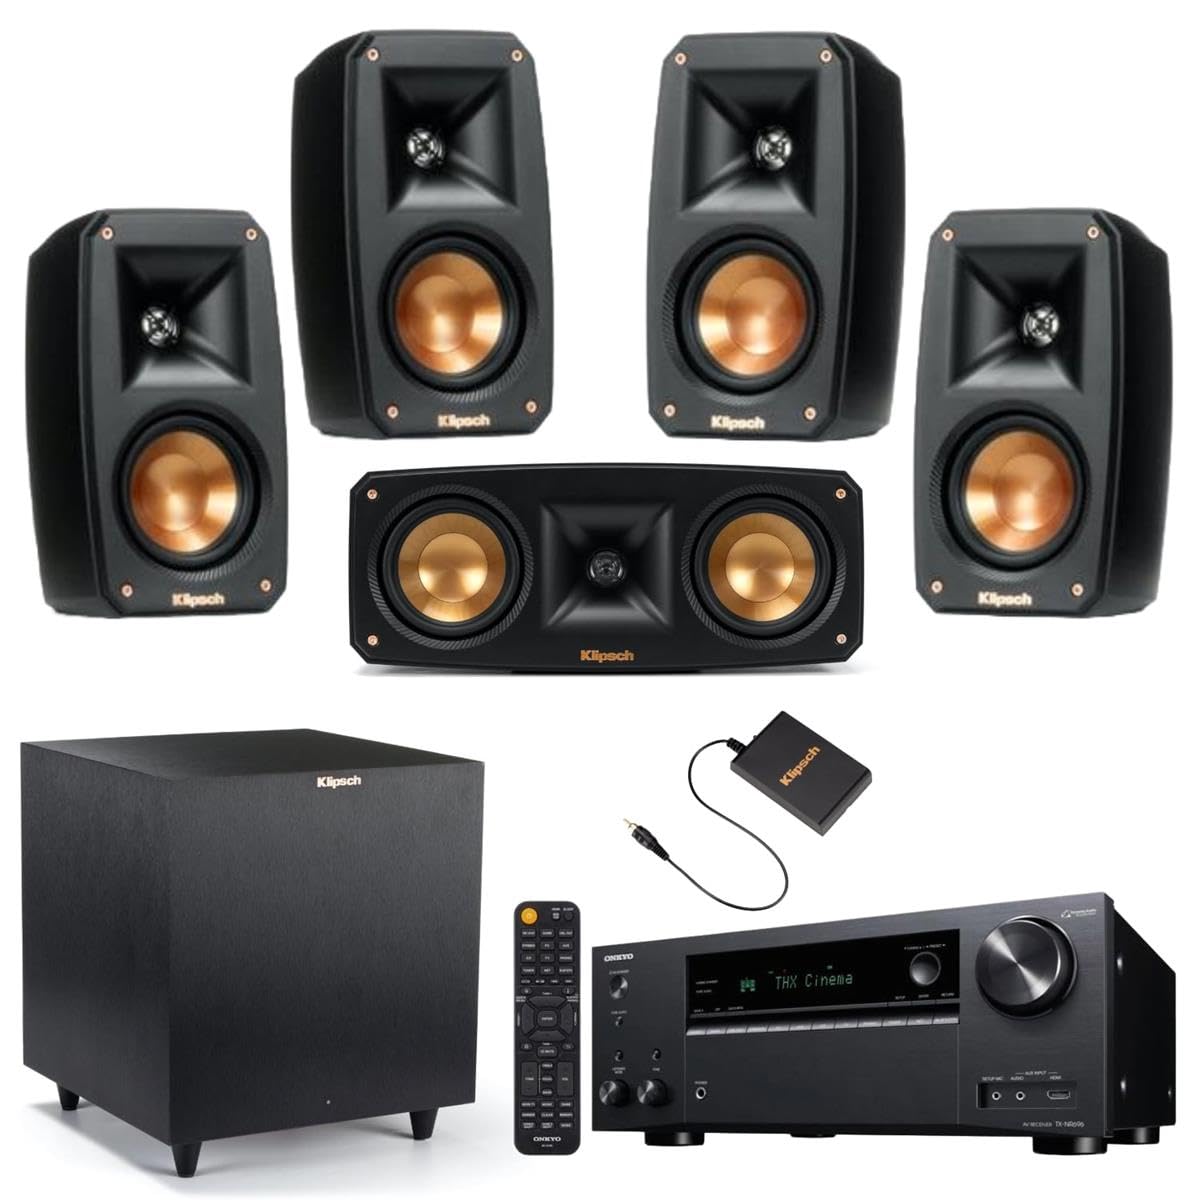 Klipsch Black Reference Theater Pack 5.1 Surround Sound System, Bundle with Onkyo TX-NR696 7.2-Channel Network A/V Receiver, 210W Per Channel (at 6 Ohms)